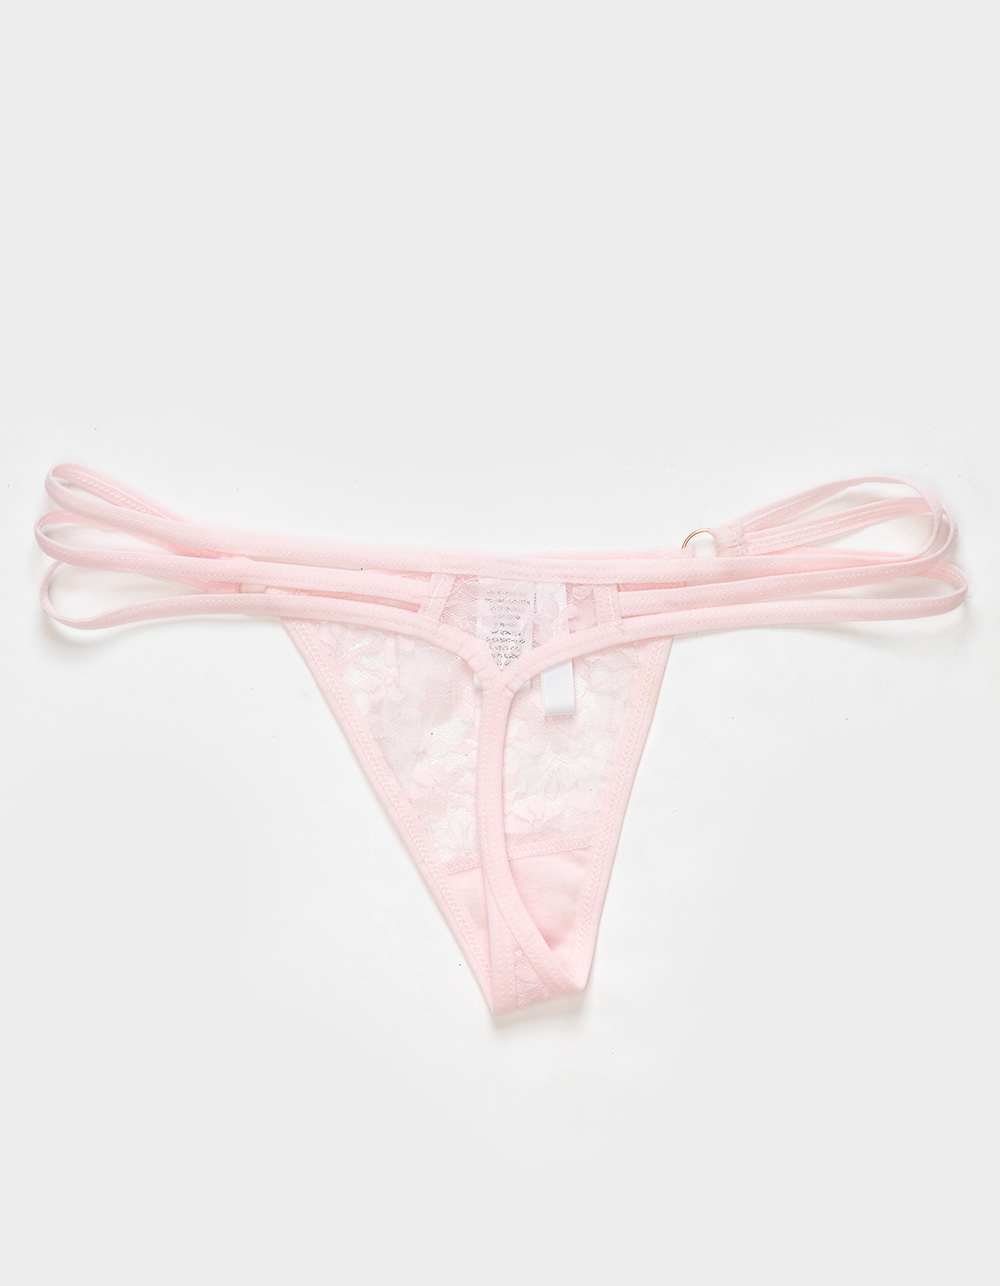 Ardene Lace Thong with Rosebud Detail in Light Pink, Size, Nylon/Spandex